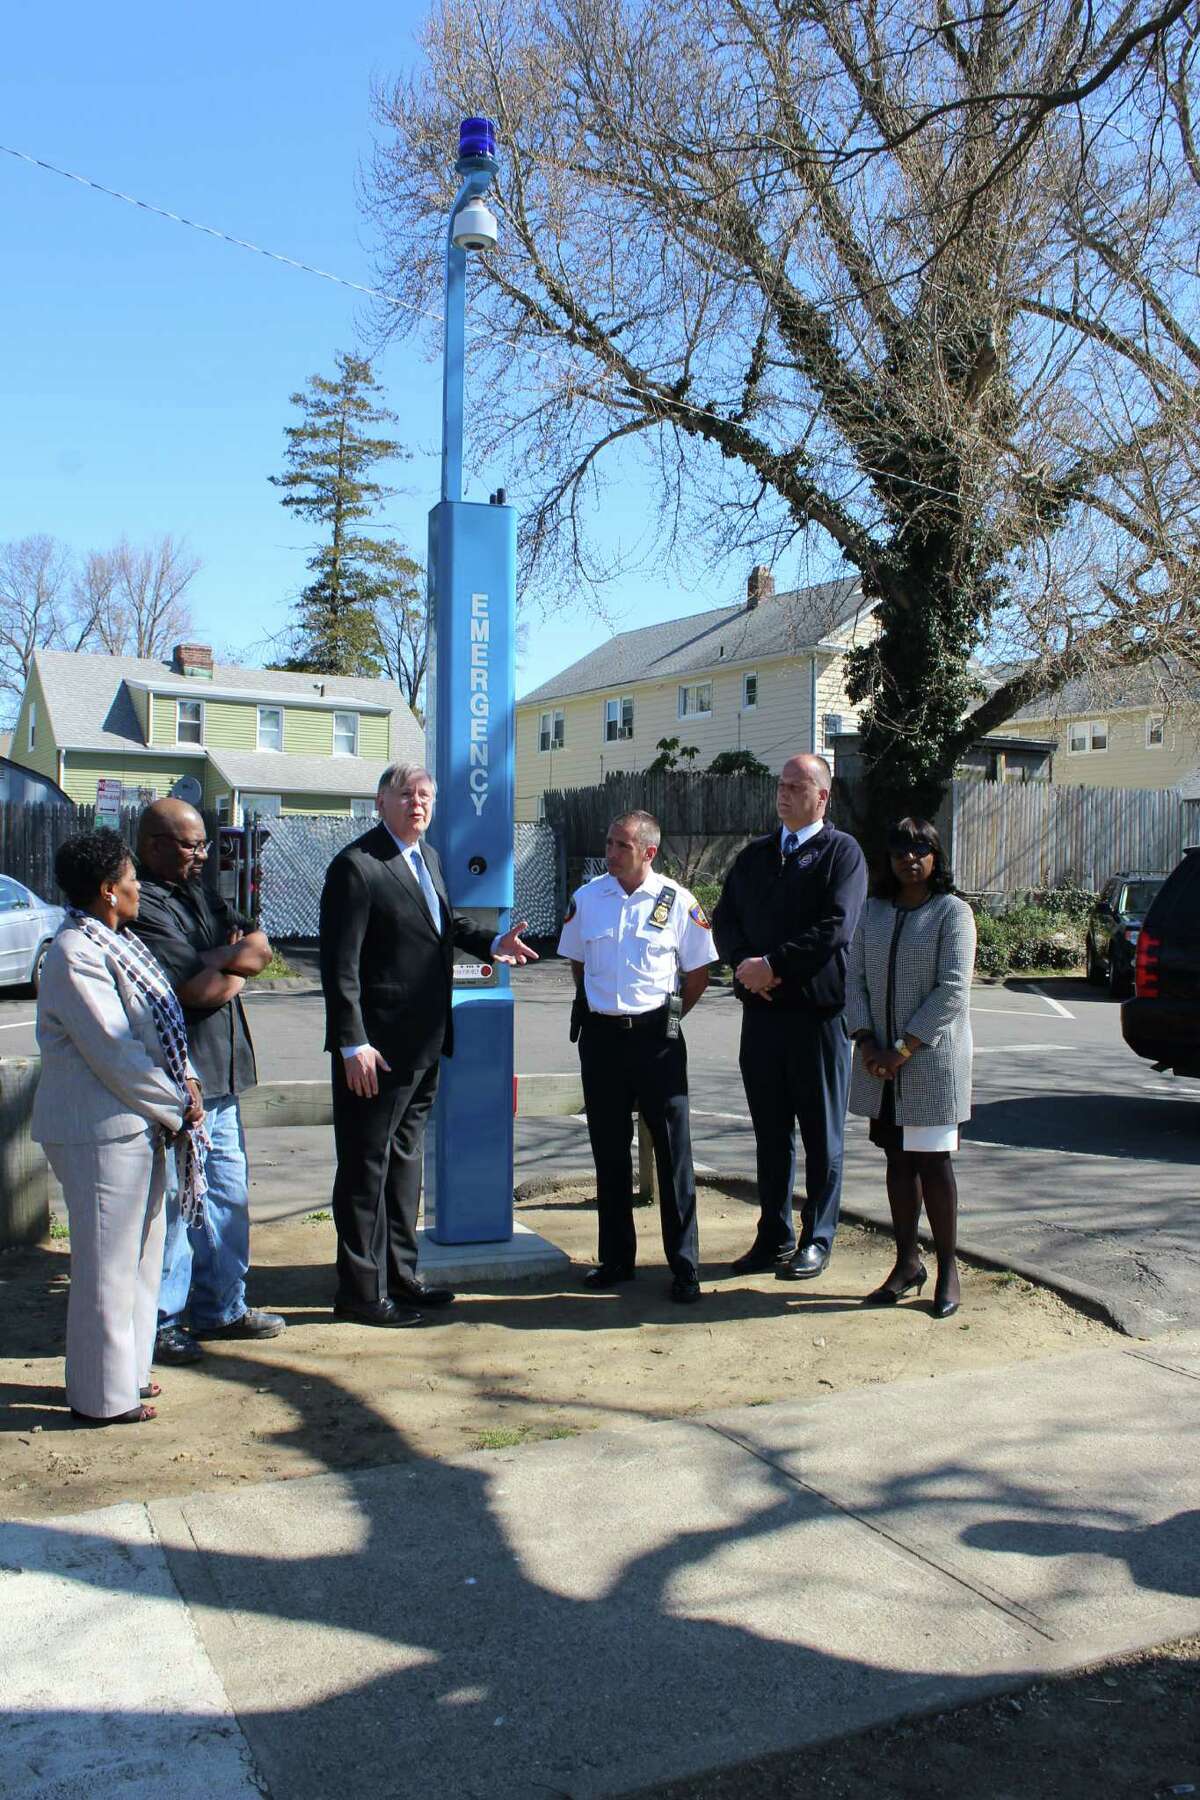 Stamford officials unveil new Blue Light Emergency Phone and Camera in Lione Park on Tuesday, April 19, 2016. The same style of beacon will be installed in Hatch Field Park on the West Side after a spate of violence.